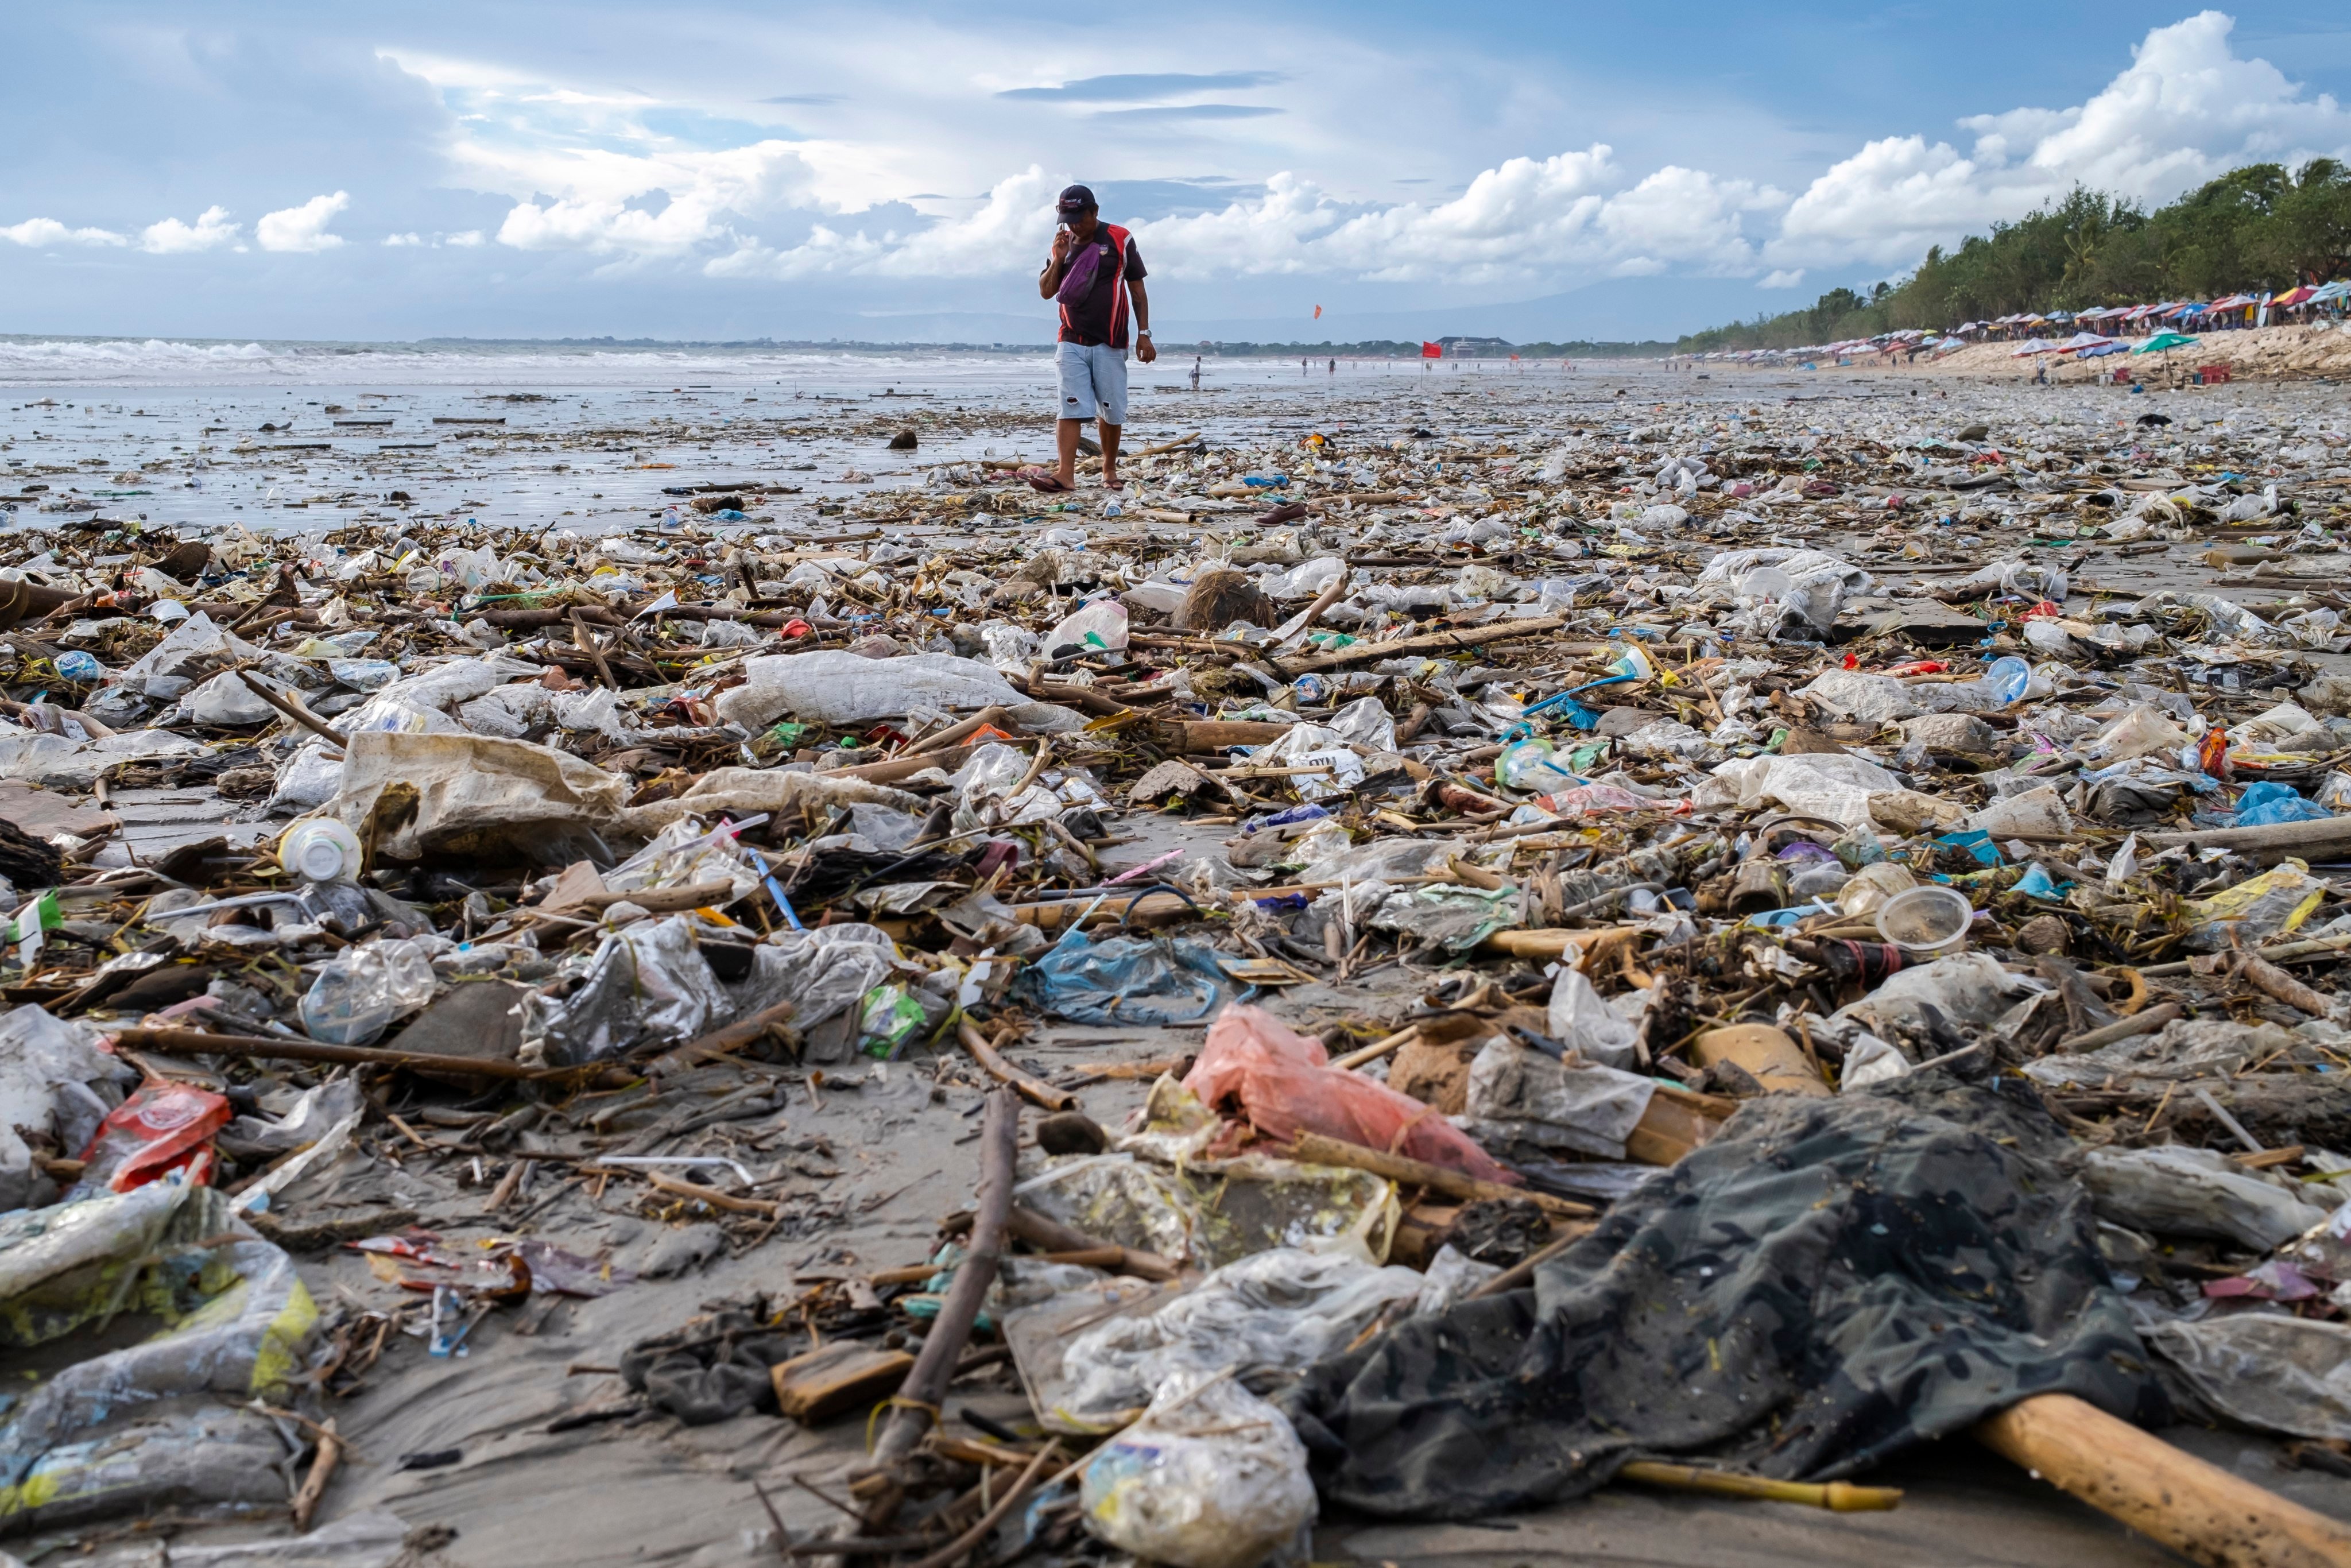 Plastic waste washed ashore at a beach in Kuta, Bali. A 30 per cent reduction in plastic pollution can be achieved globally by 2040    by simply promoting reuse options, UNEP says. Photo: EPA-EFE